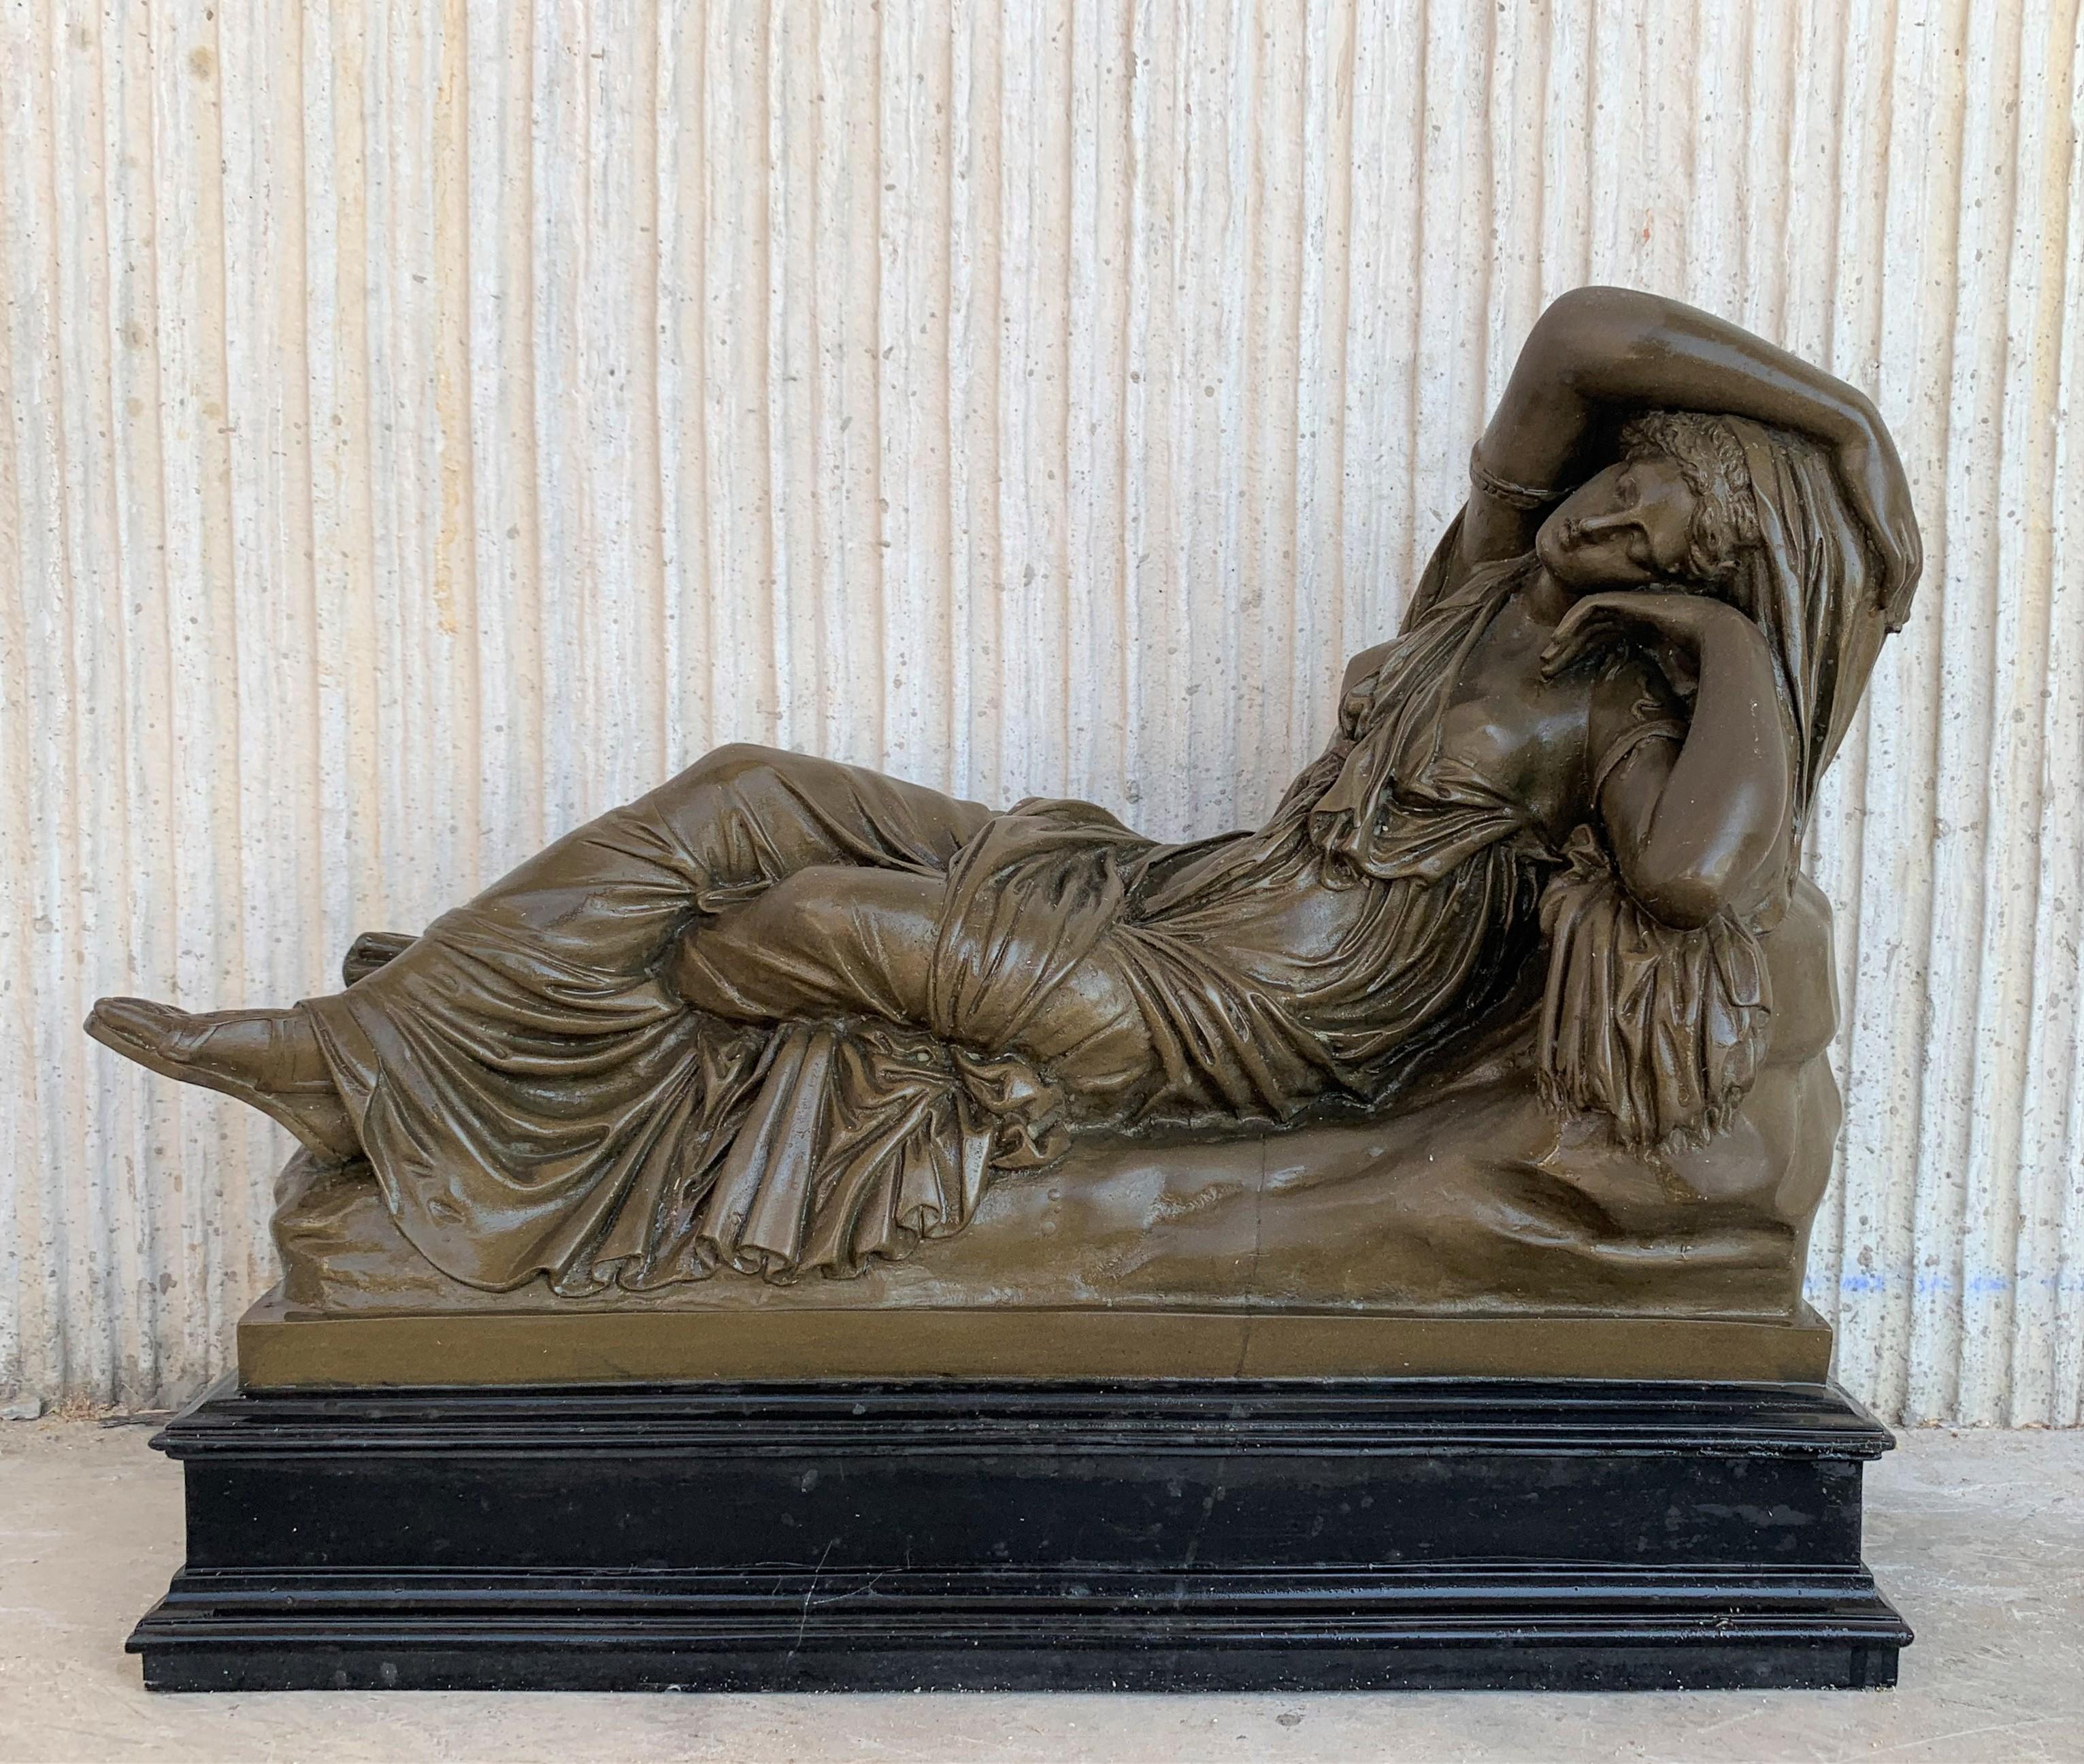 Italian bronze Tuscany neoclassical style sculpture featuring a relaxed woman in black base.